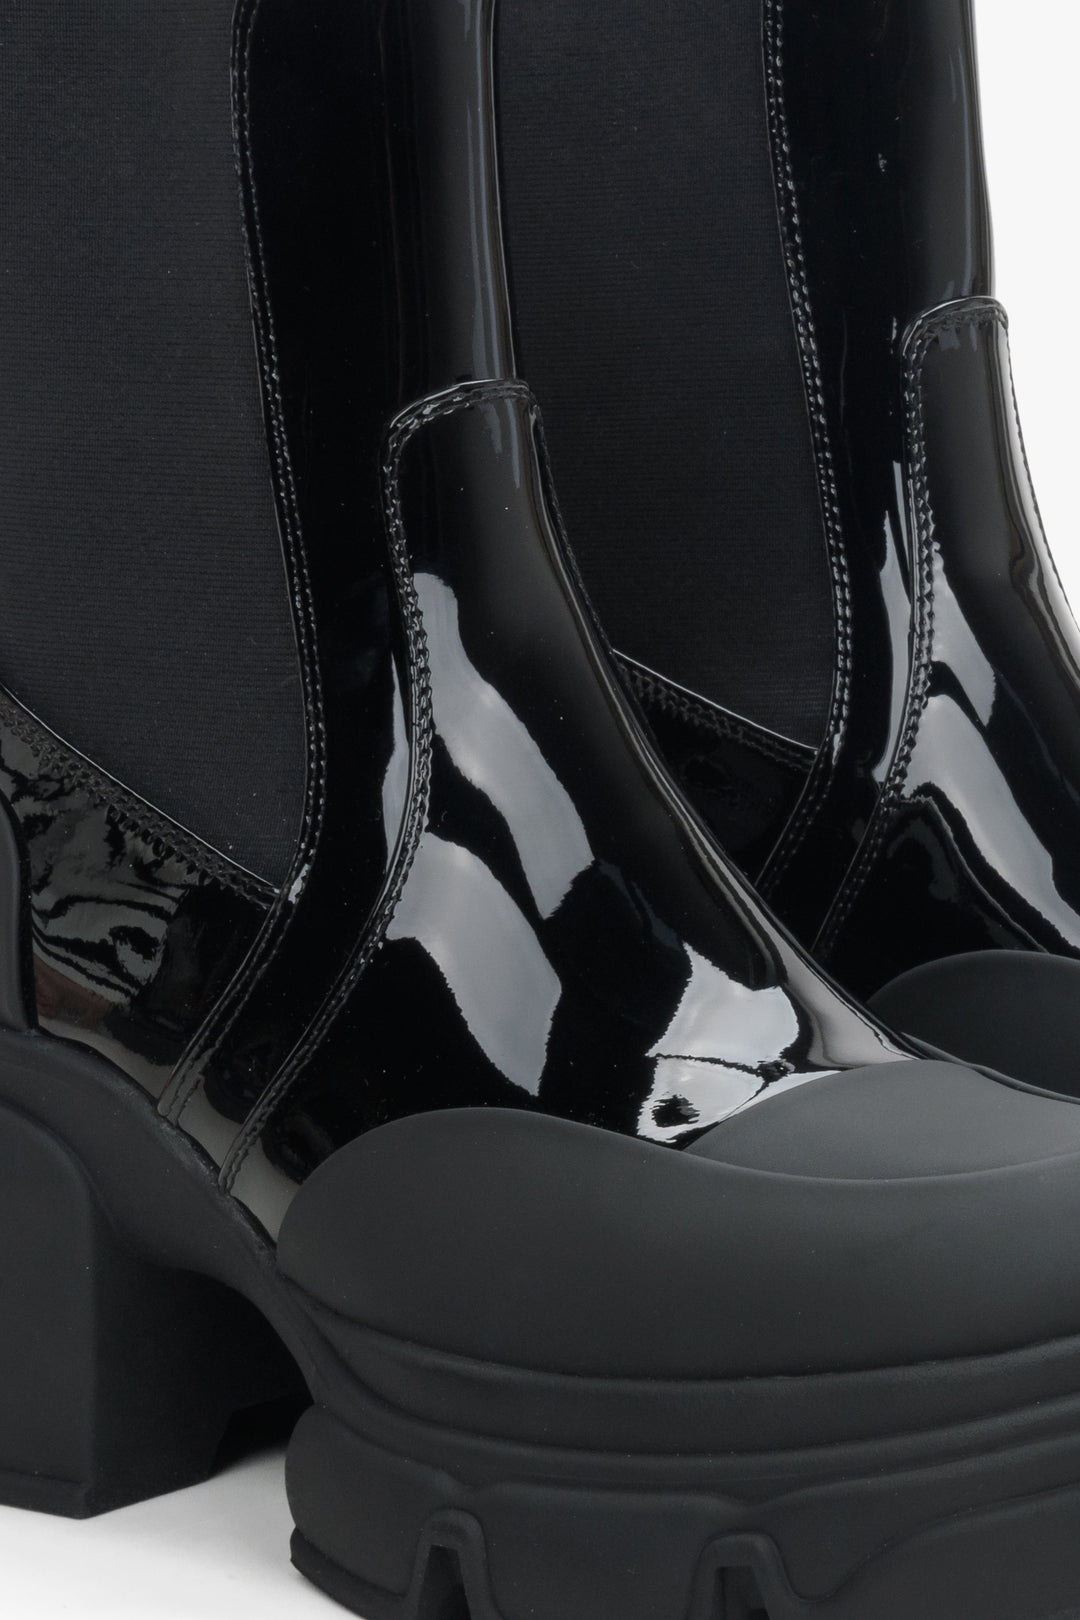 Women's black Chelsea boots by Estro made of patent natural leather - close-up on details.